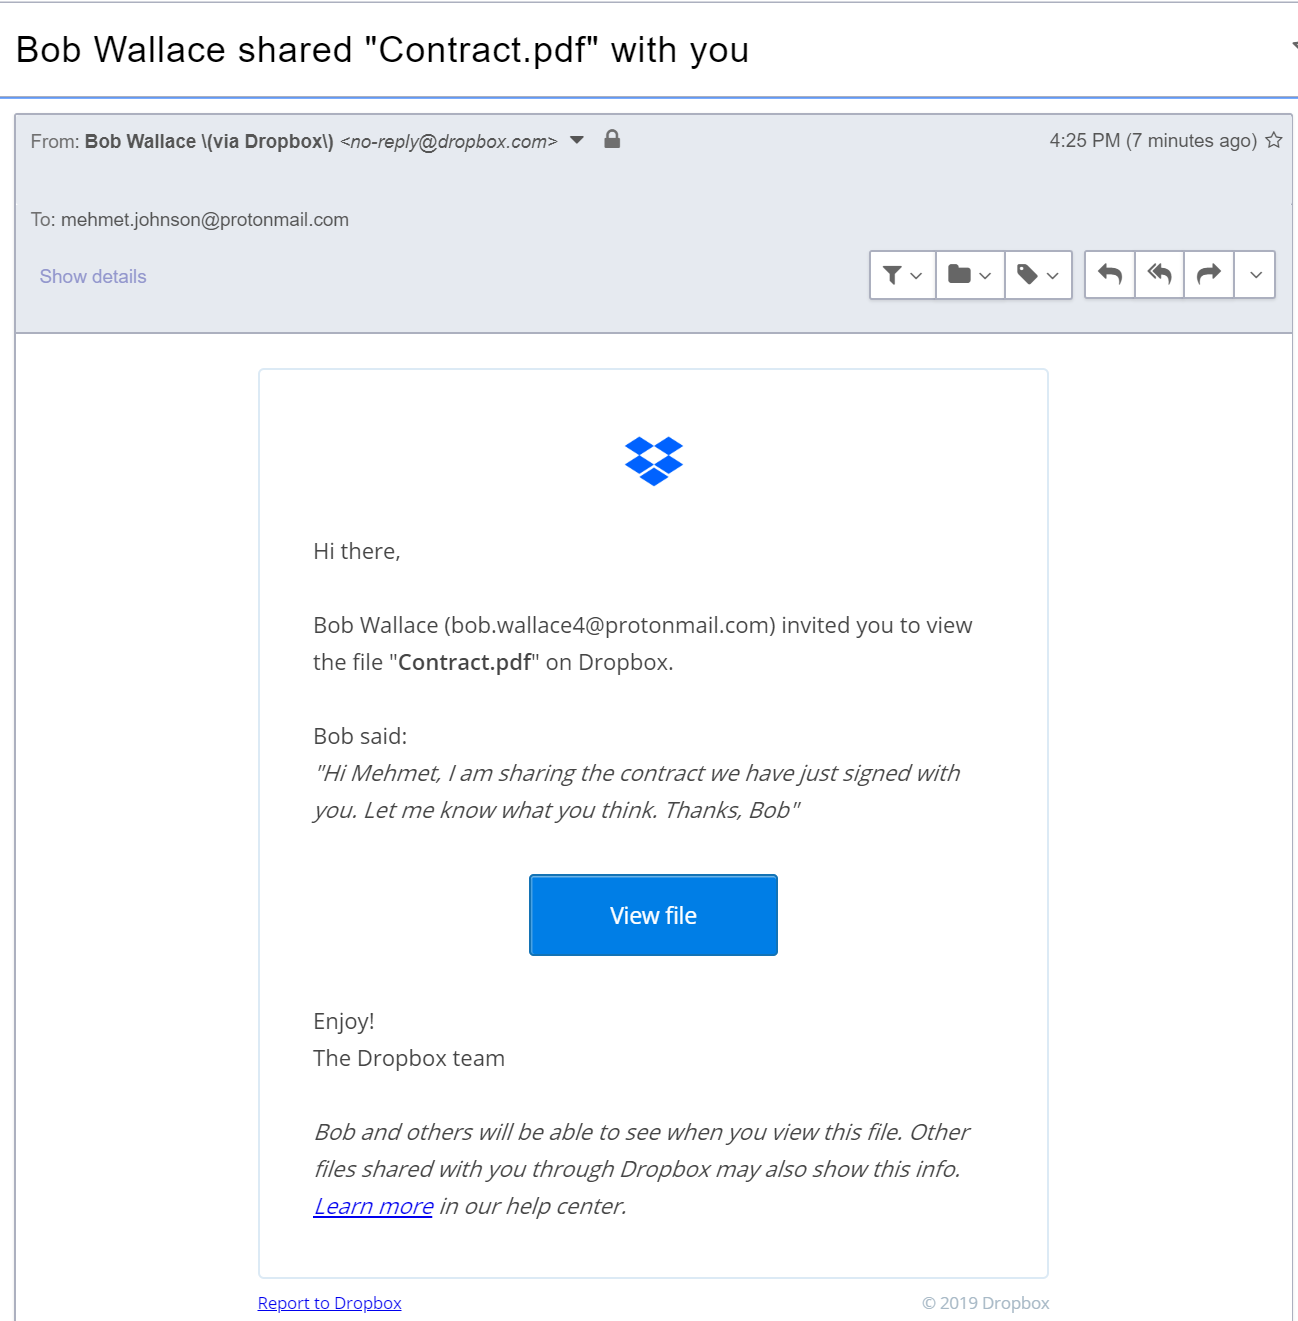 Example of a phishing email using a Dropbox file share. This incident was investigated by the Mossé Security CSIRT (Computer Security Incident Response Team).